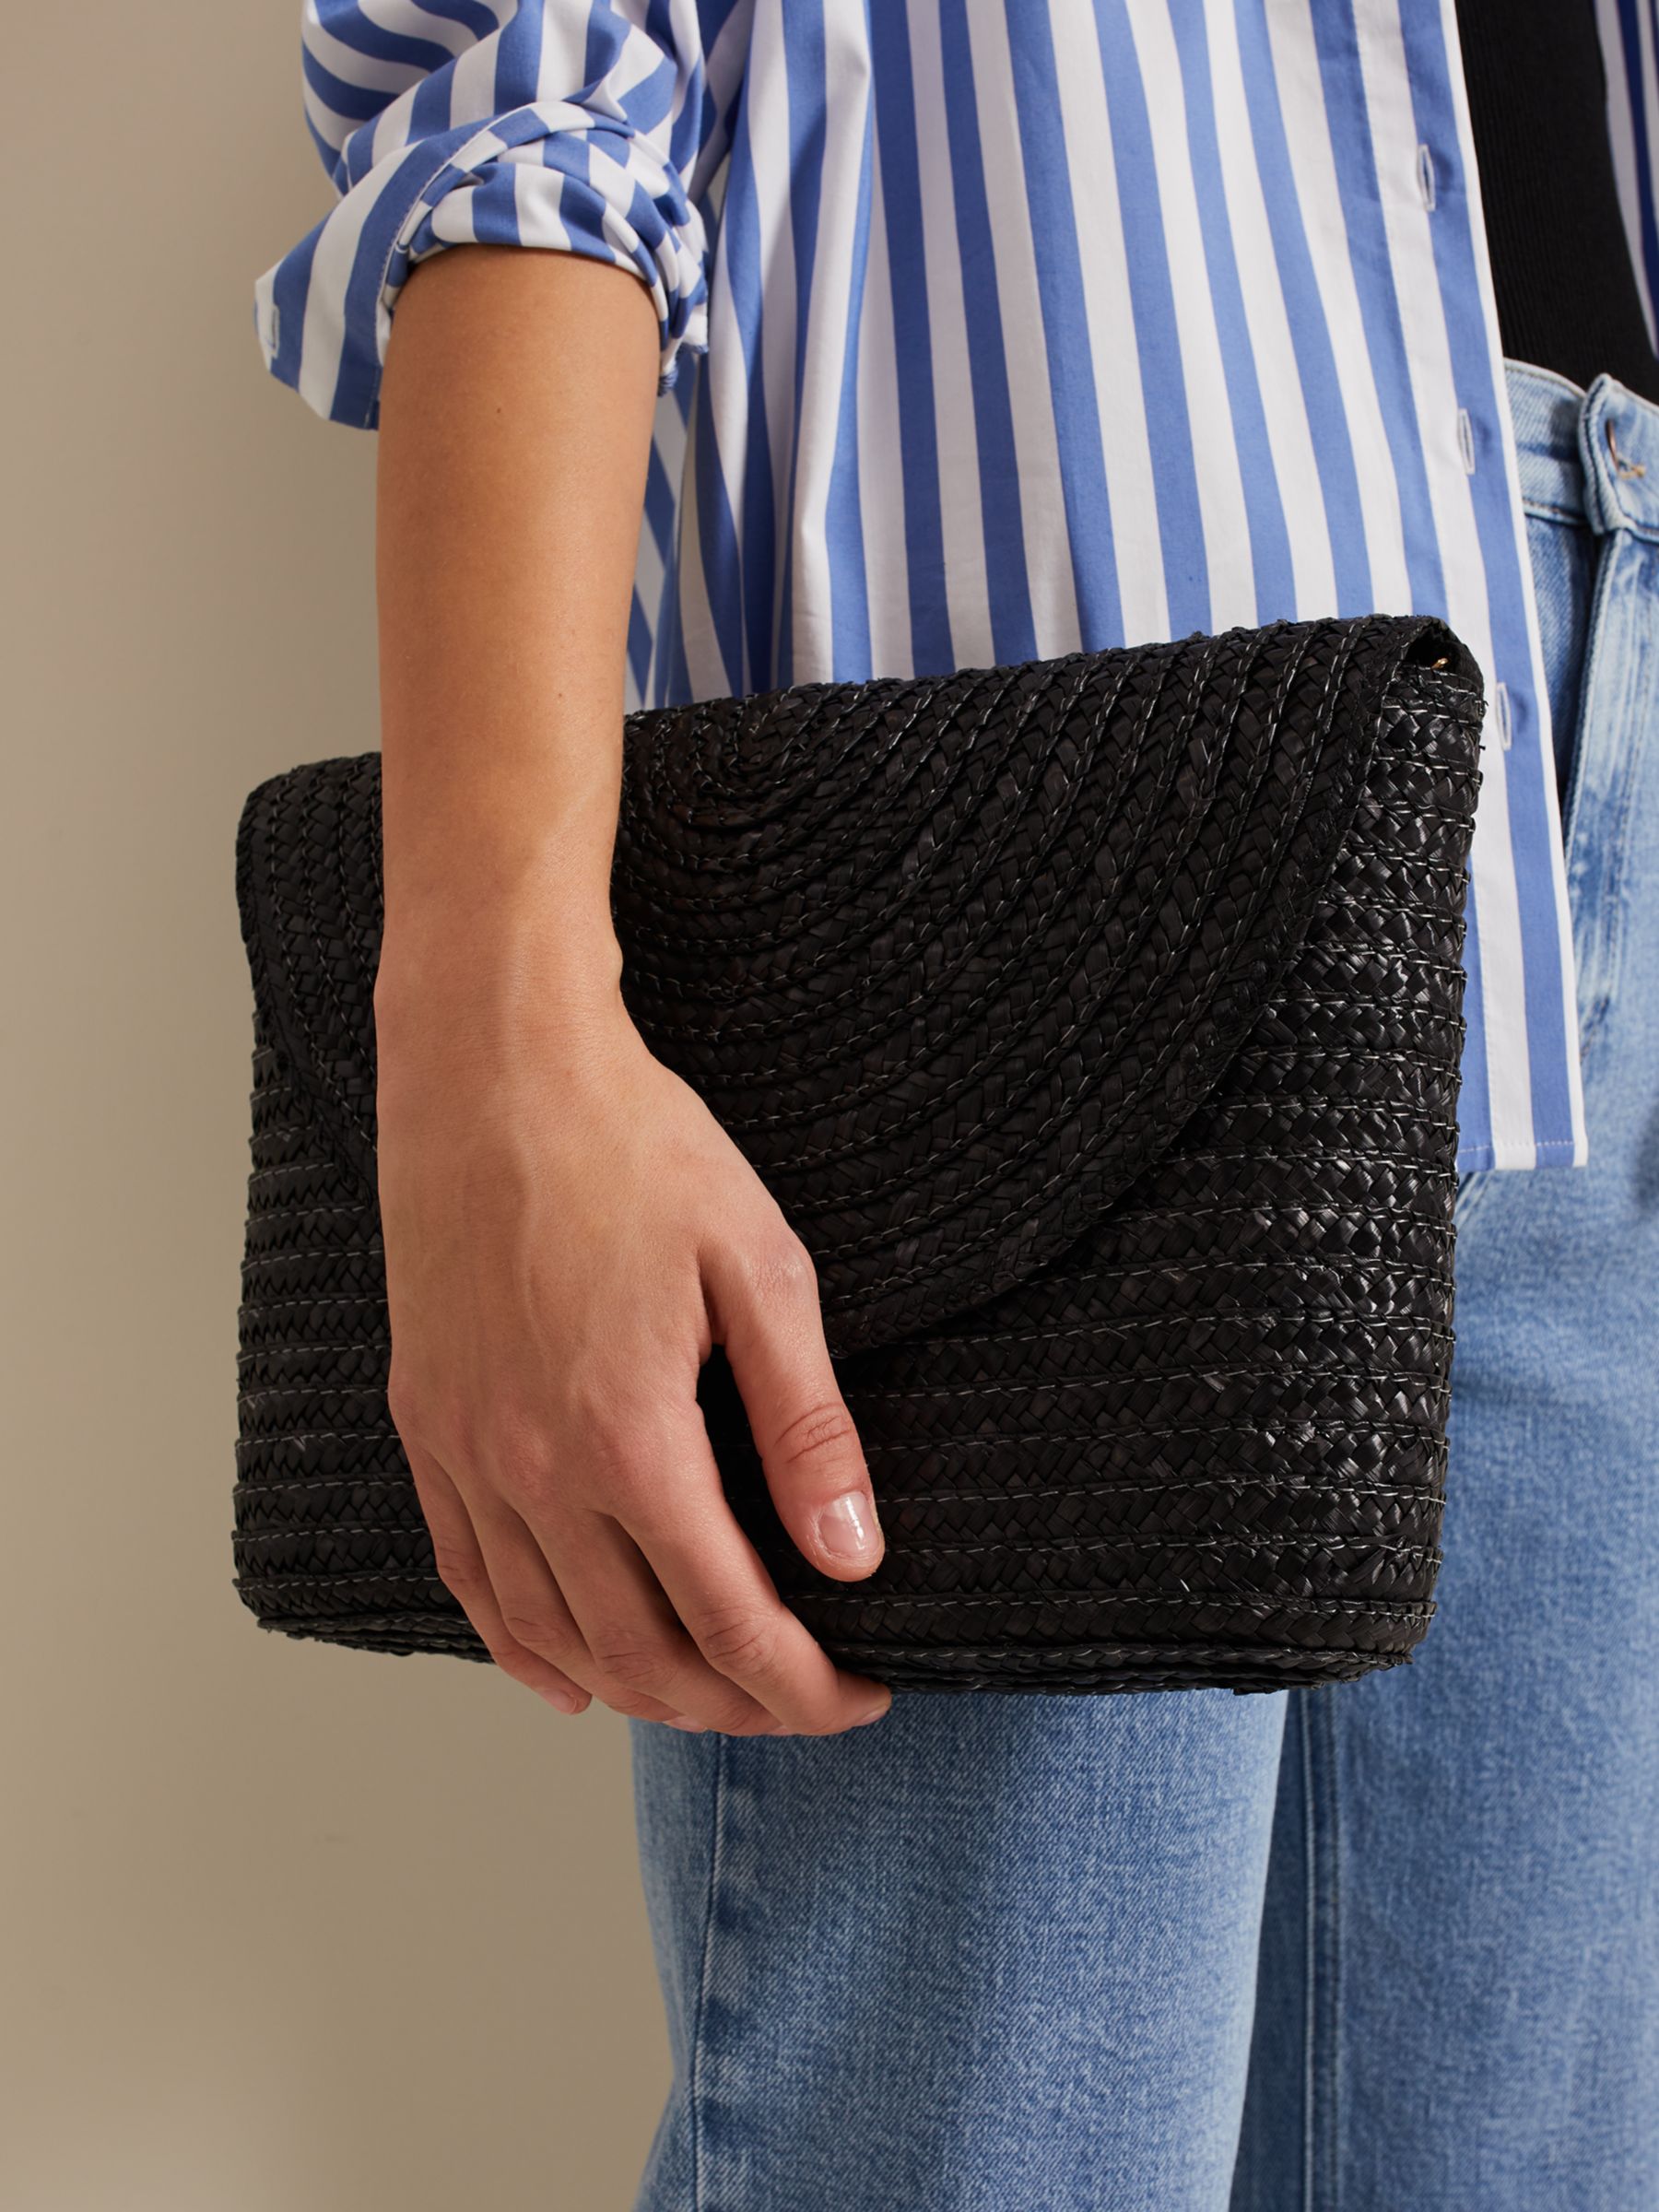 Buy Phase Eight  Oversized Straw Clutch Bag, Black Online at johnlewis.com